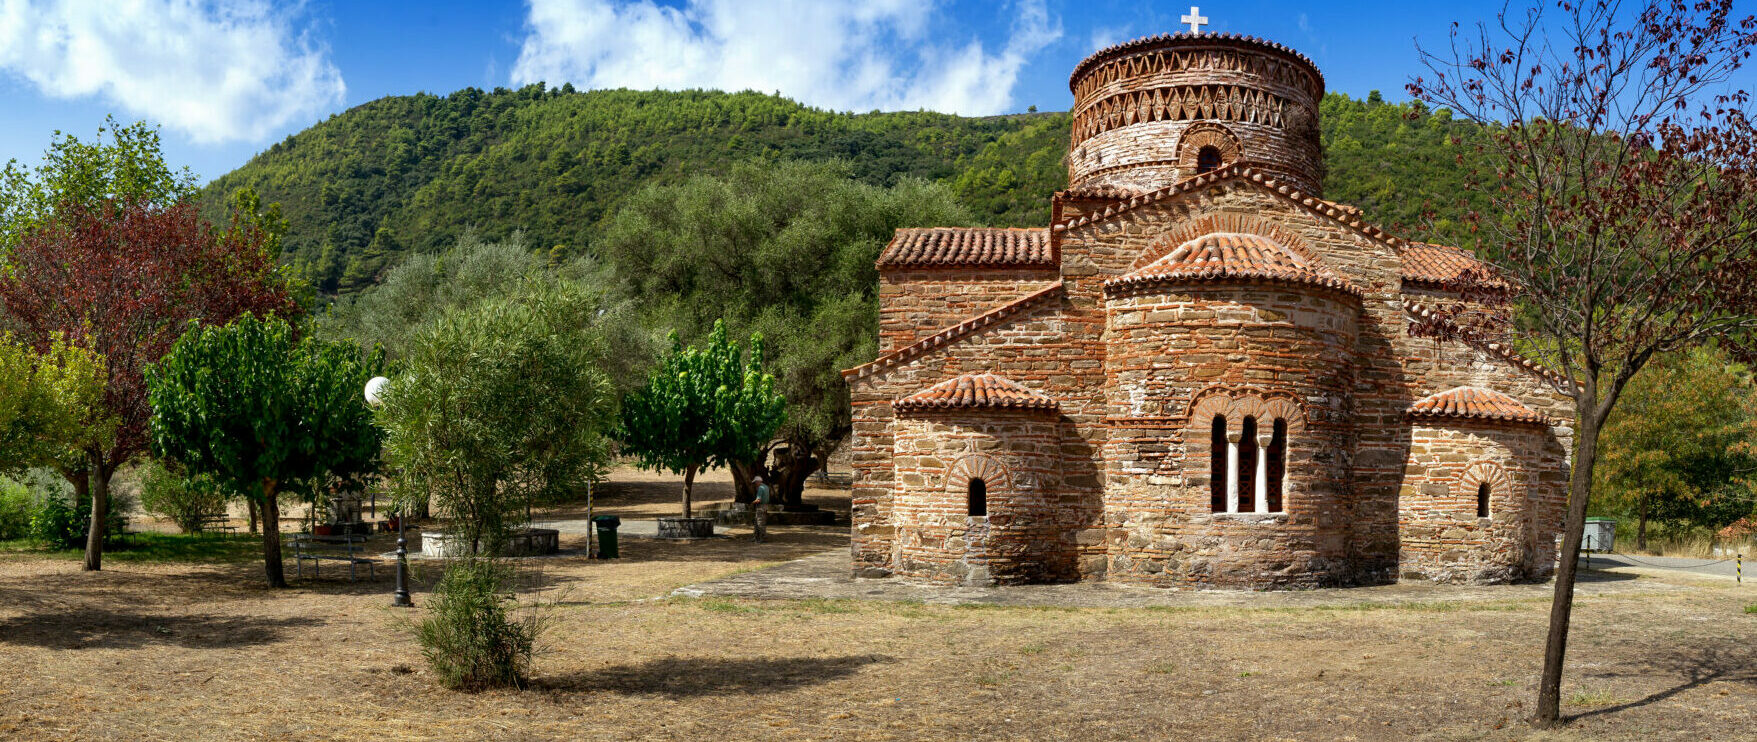 The imposing churches of Greece dedicated to Virgin Mary